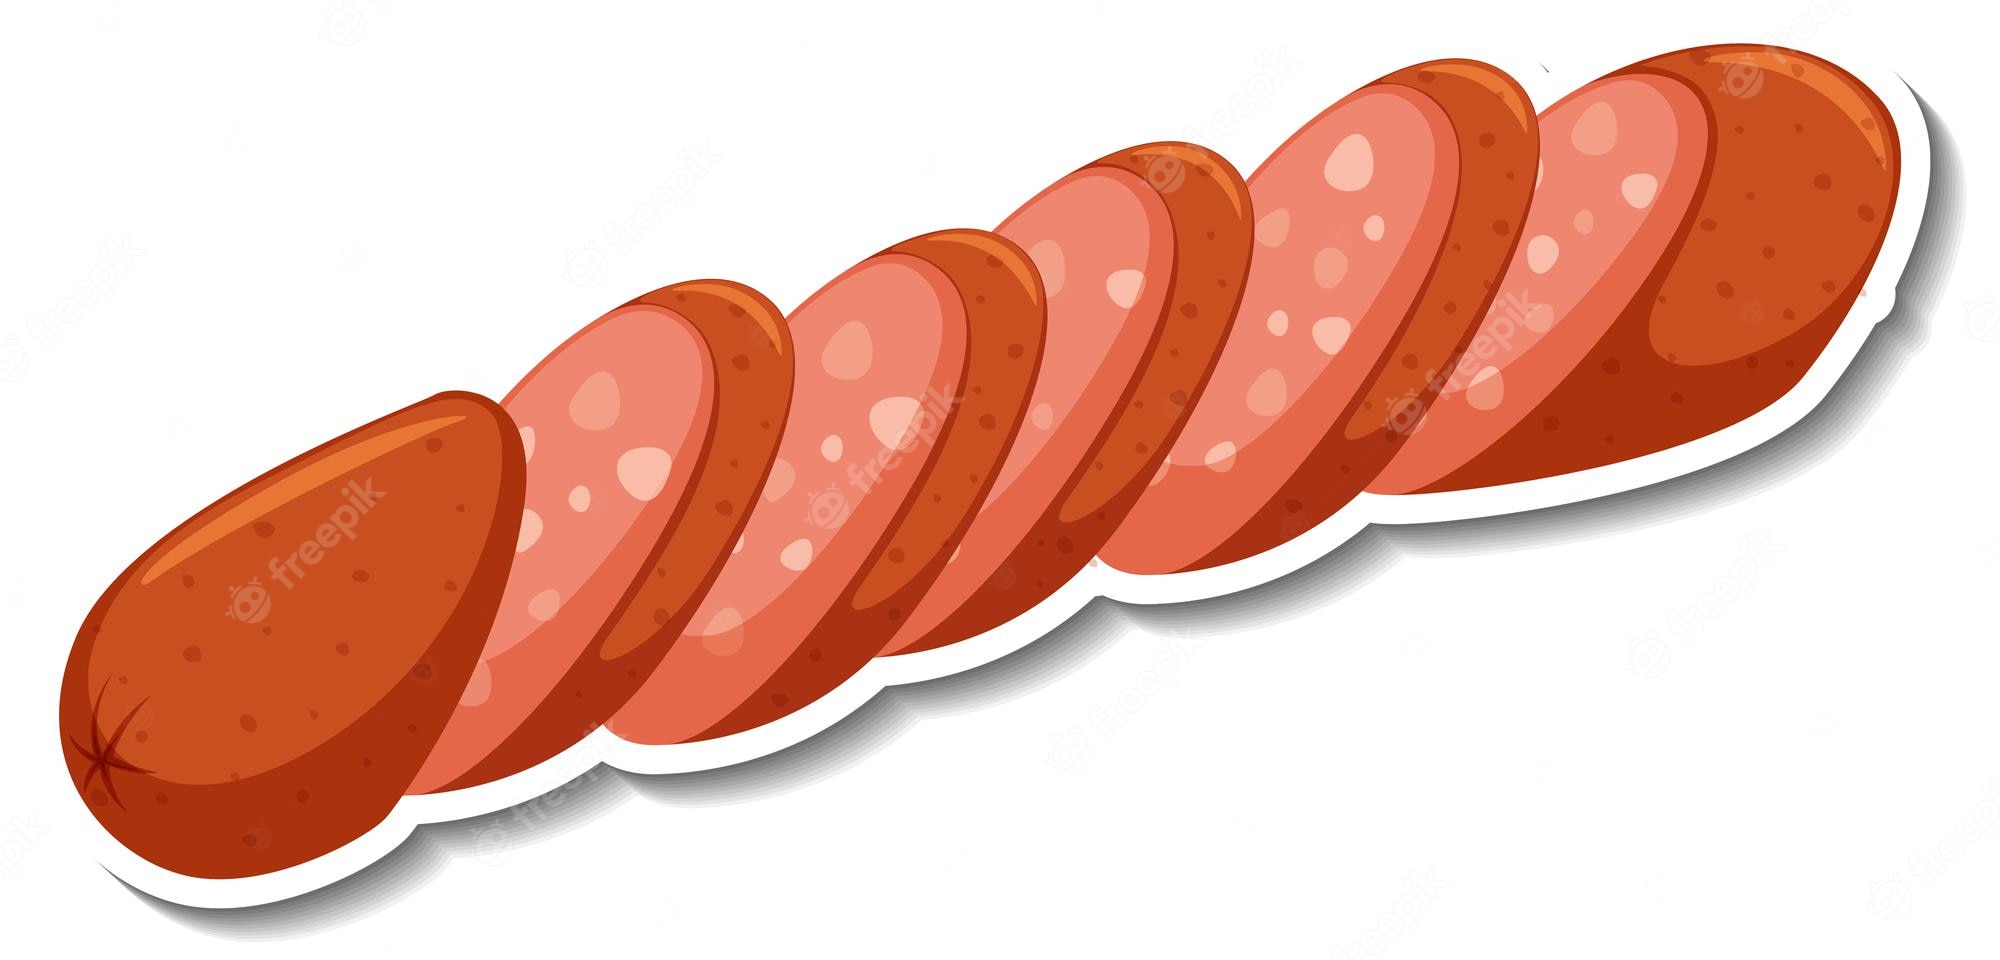 Sausage Clipart PNG Images, Sausage Vector Illustration With - Clip Art ...